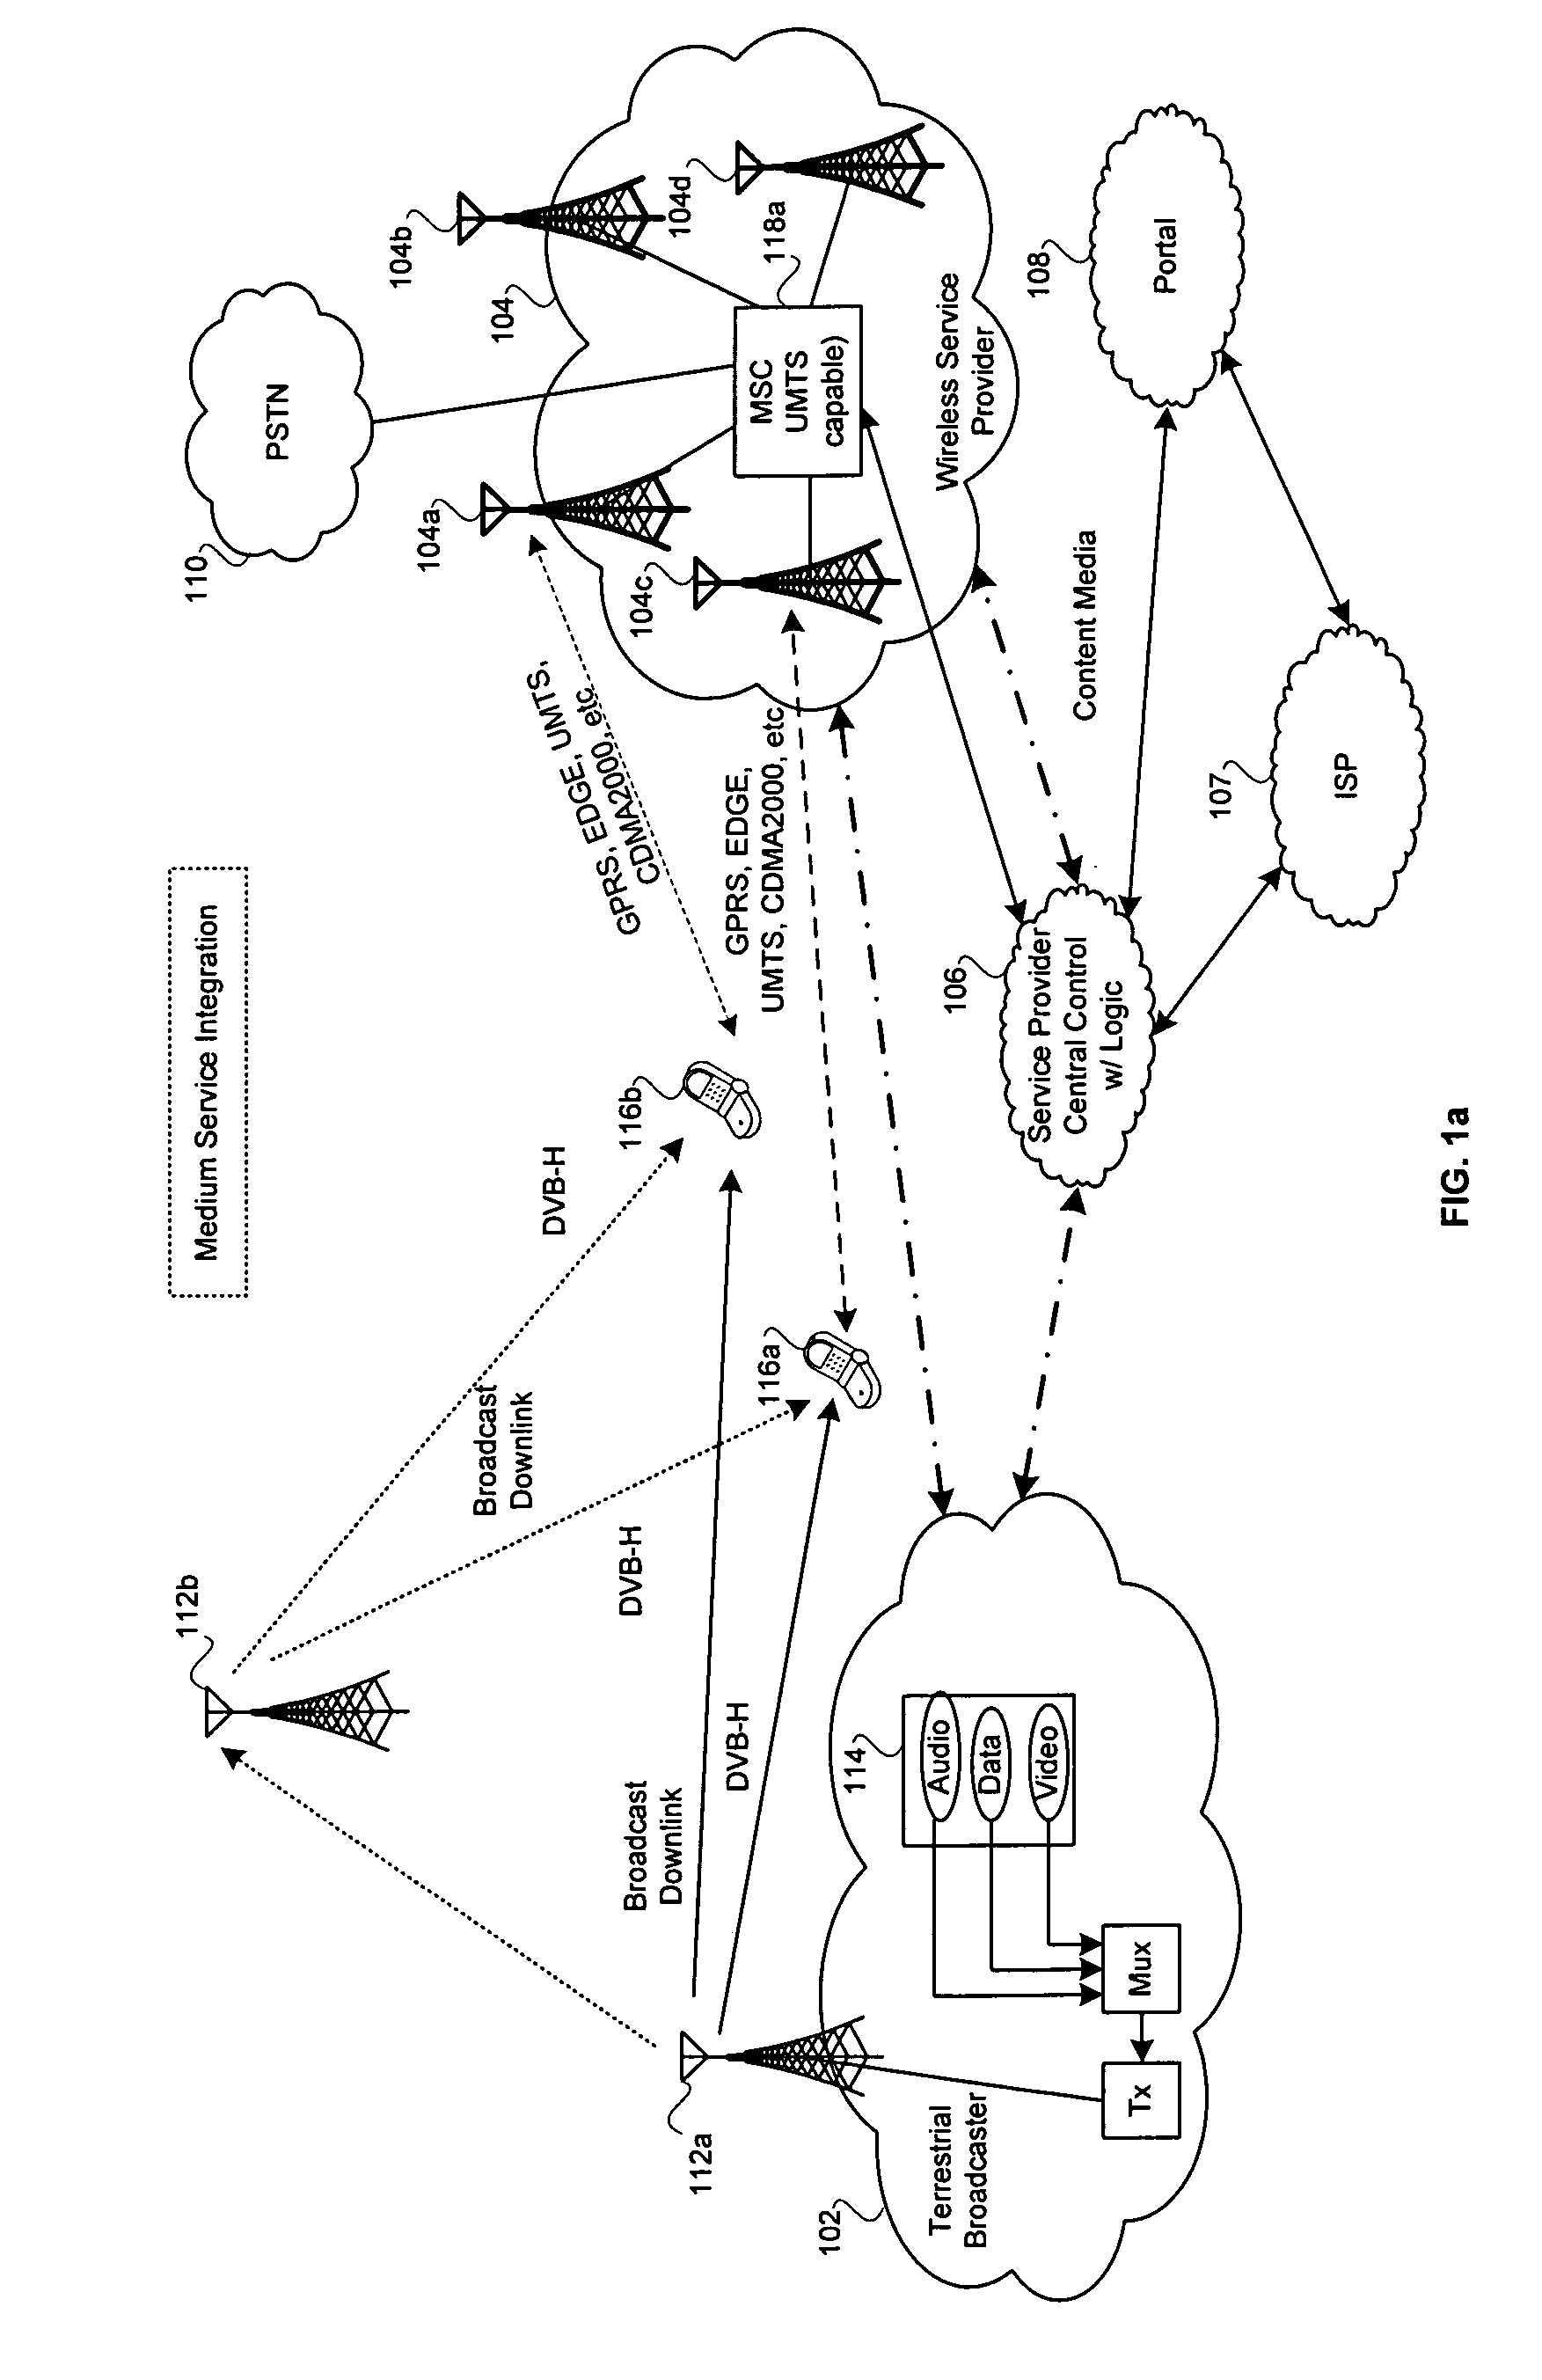 Method and system for a mobile receiver architecture for European band cellular and broadcasting